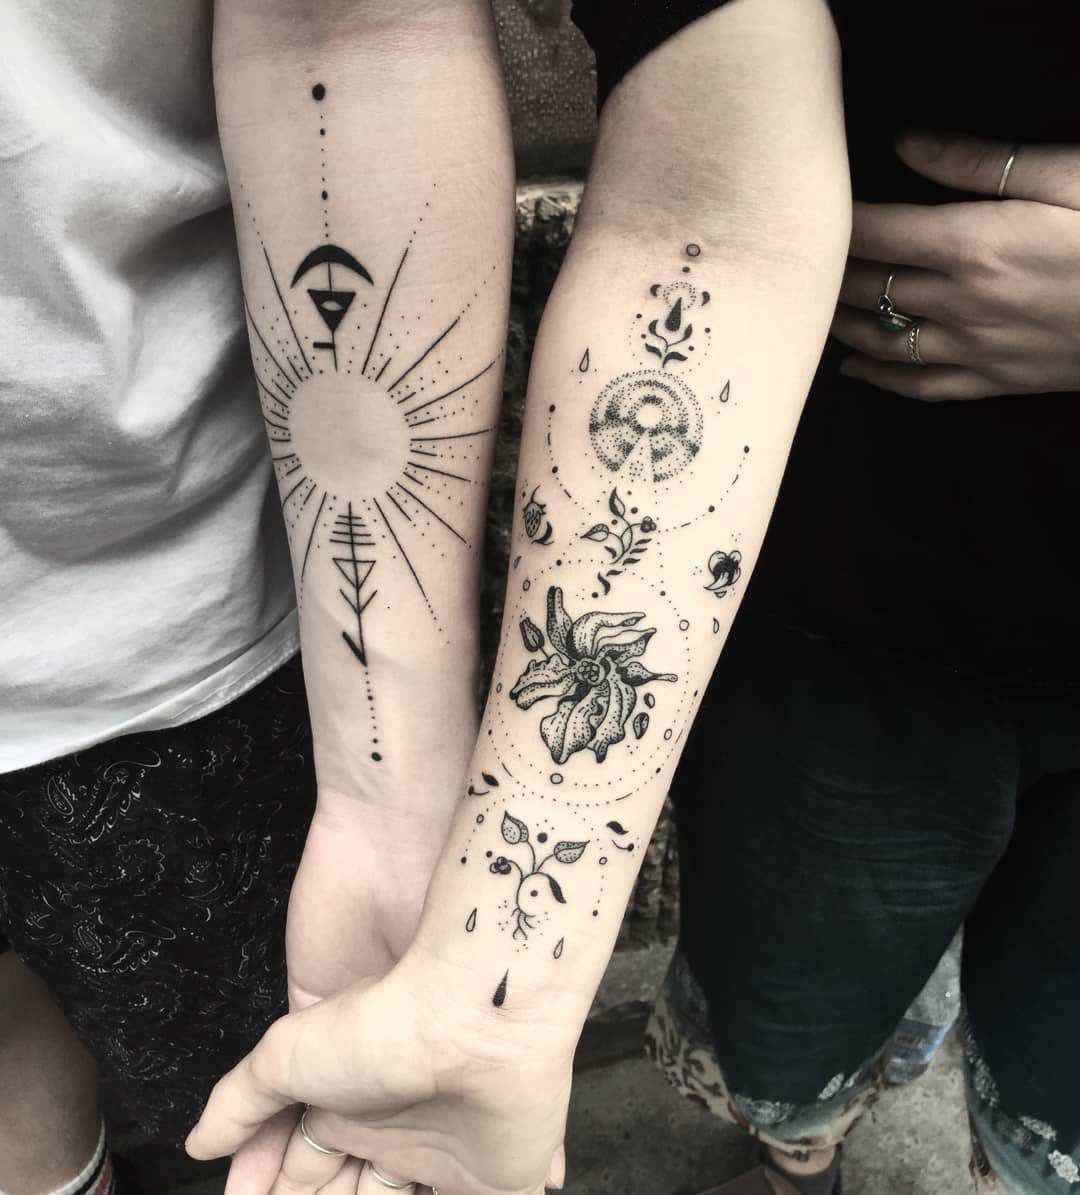 Share 95 about lock and key couple tattoo super cool  indaotaonec